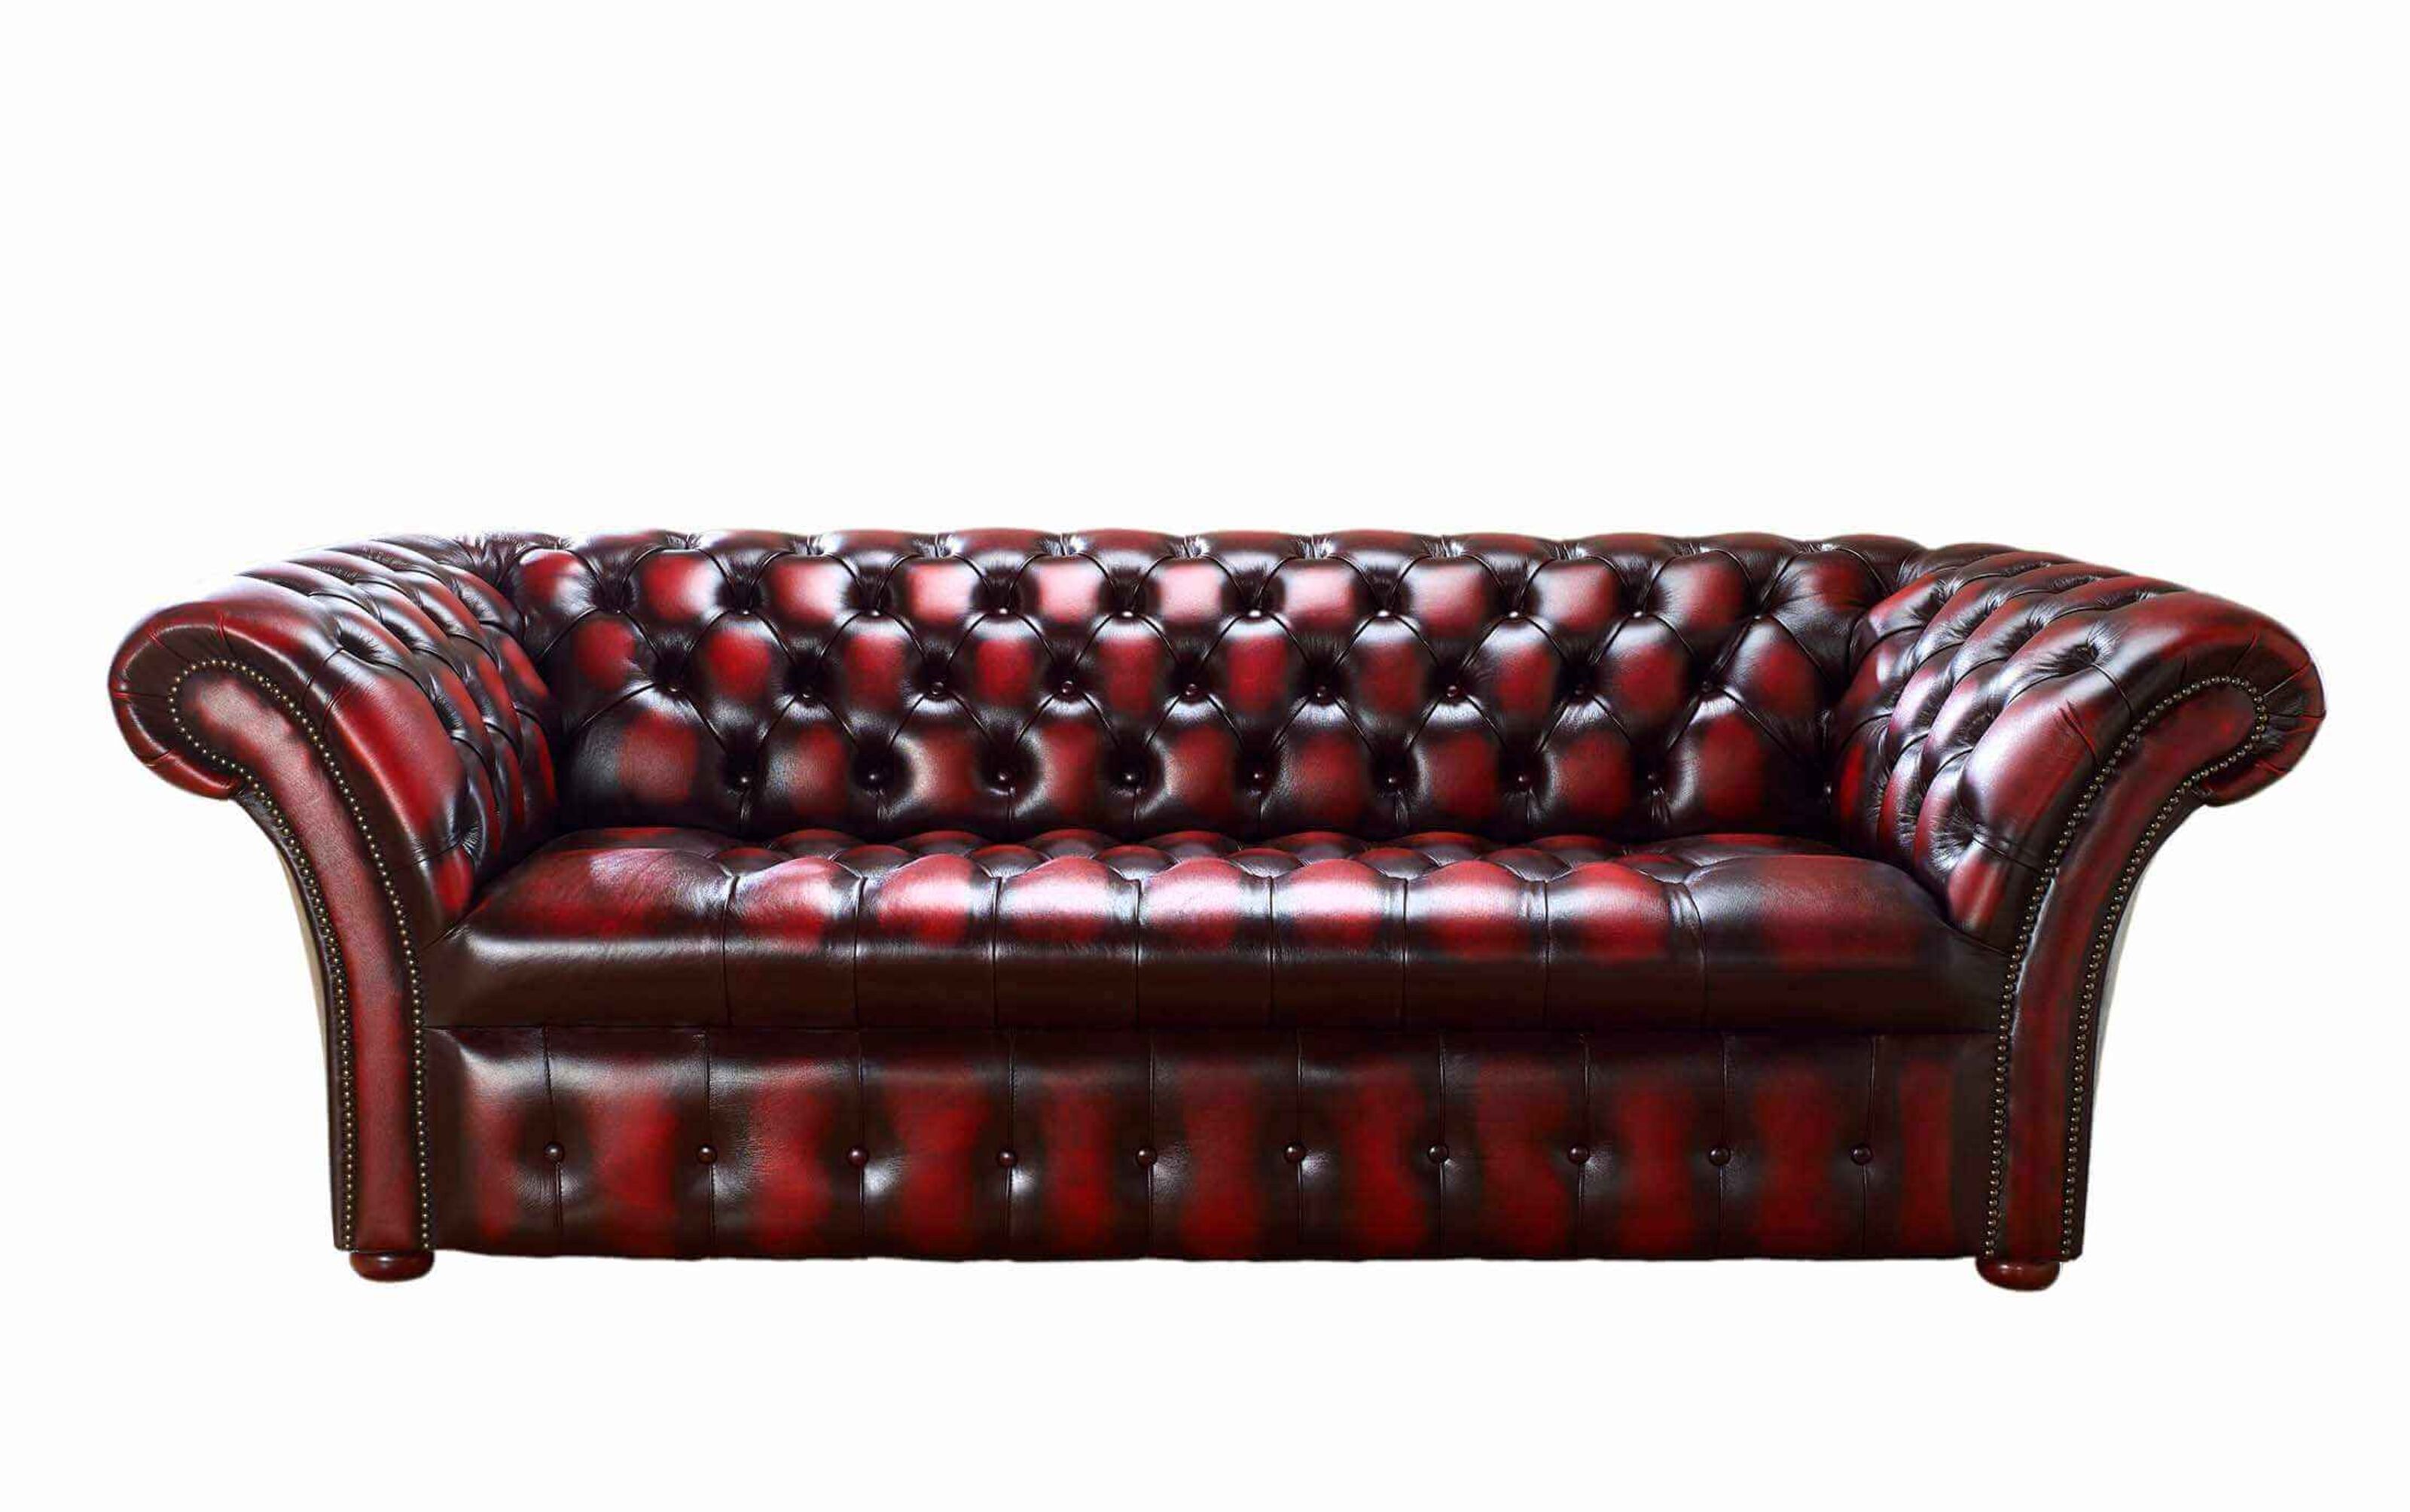 Modern Chesterfield Sofas: Elevate Your Home's Style with DesignerSofas4u  %Post Title